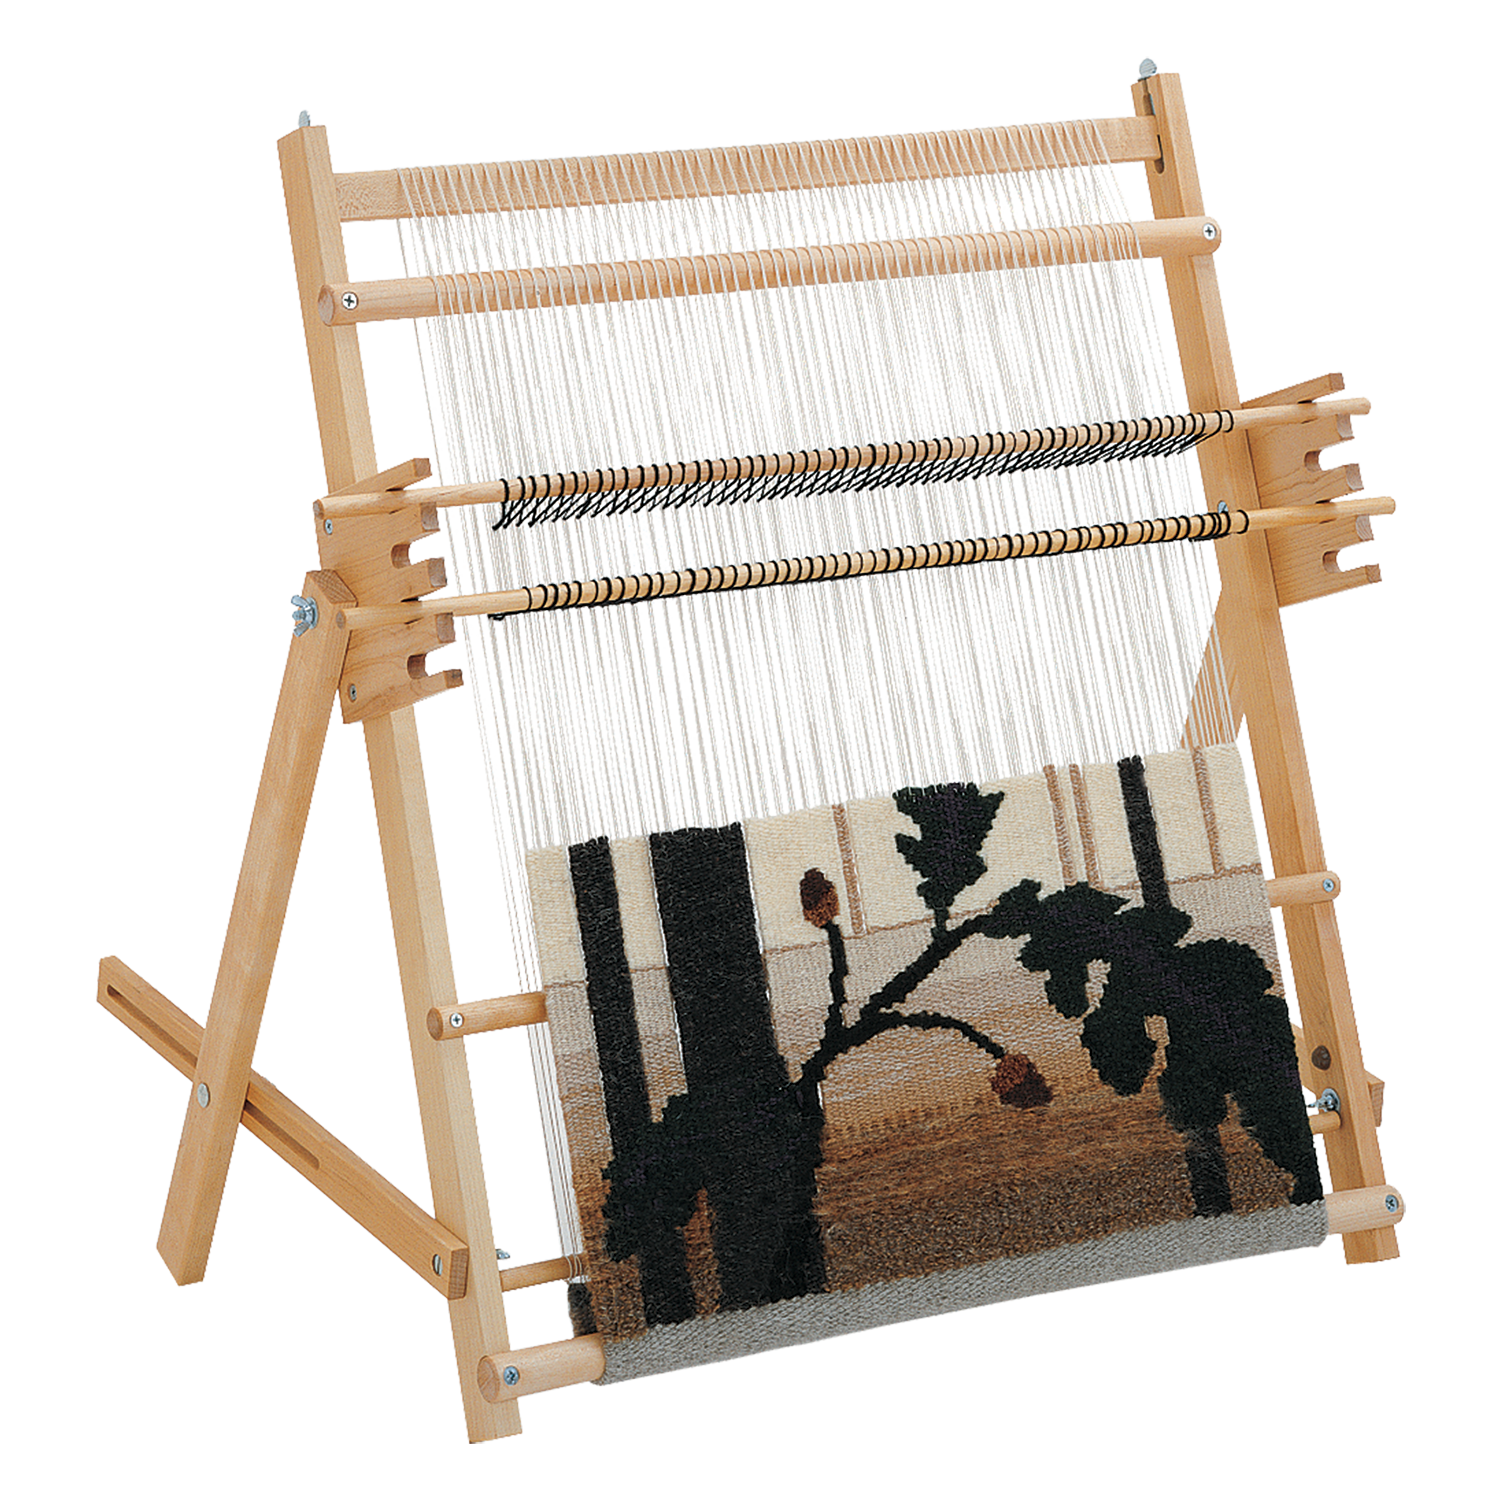 Tapestry Loom – Schacht Spindle Company